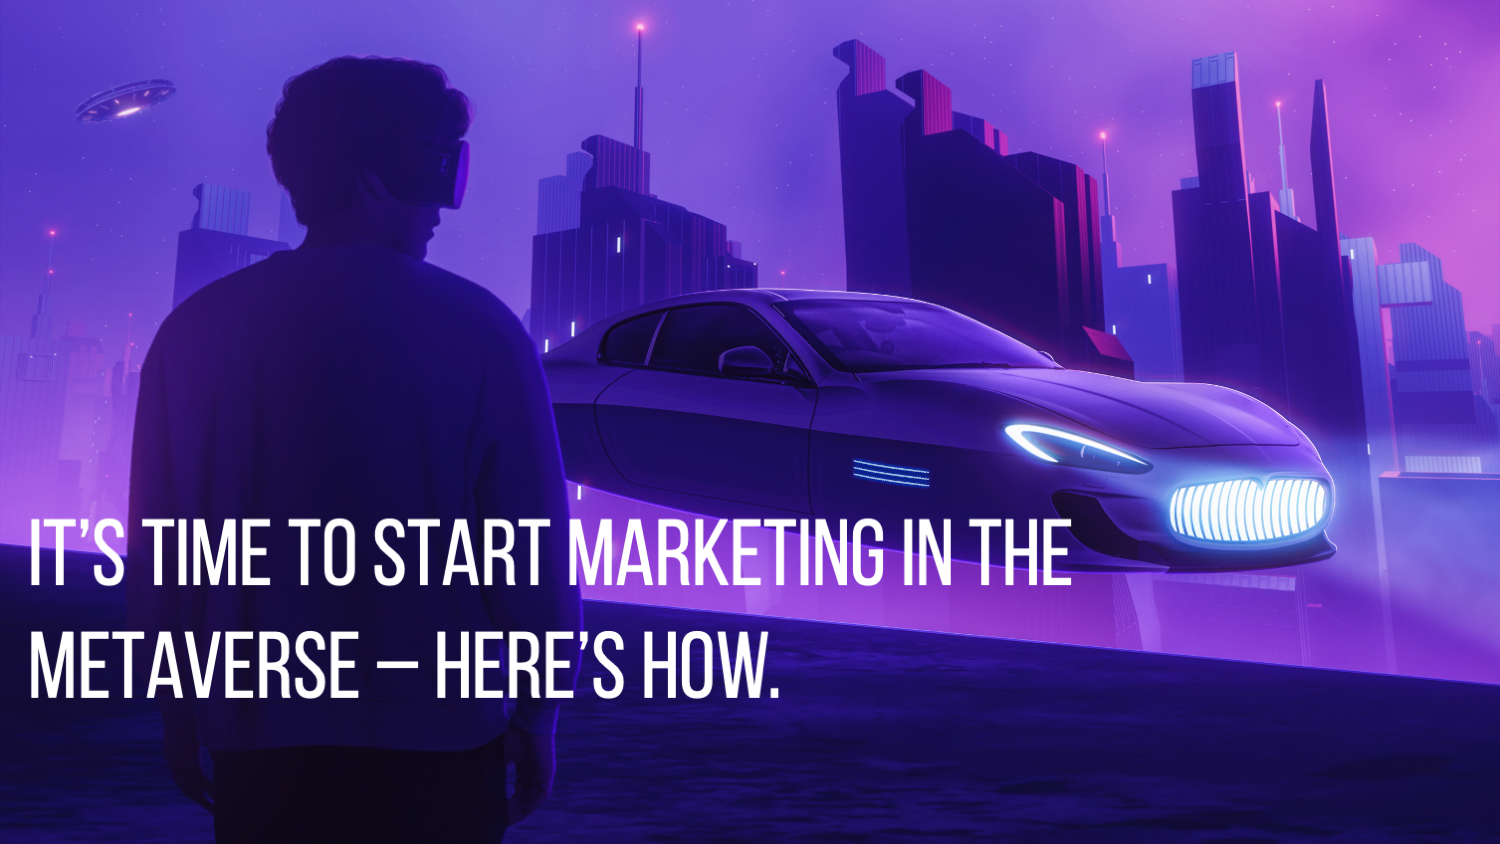 A flying car on a purple city scene with copy overlay - It's time to start marketing in the mataverse - here's how.